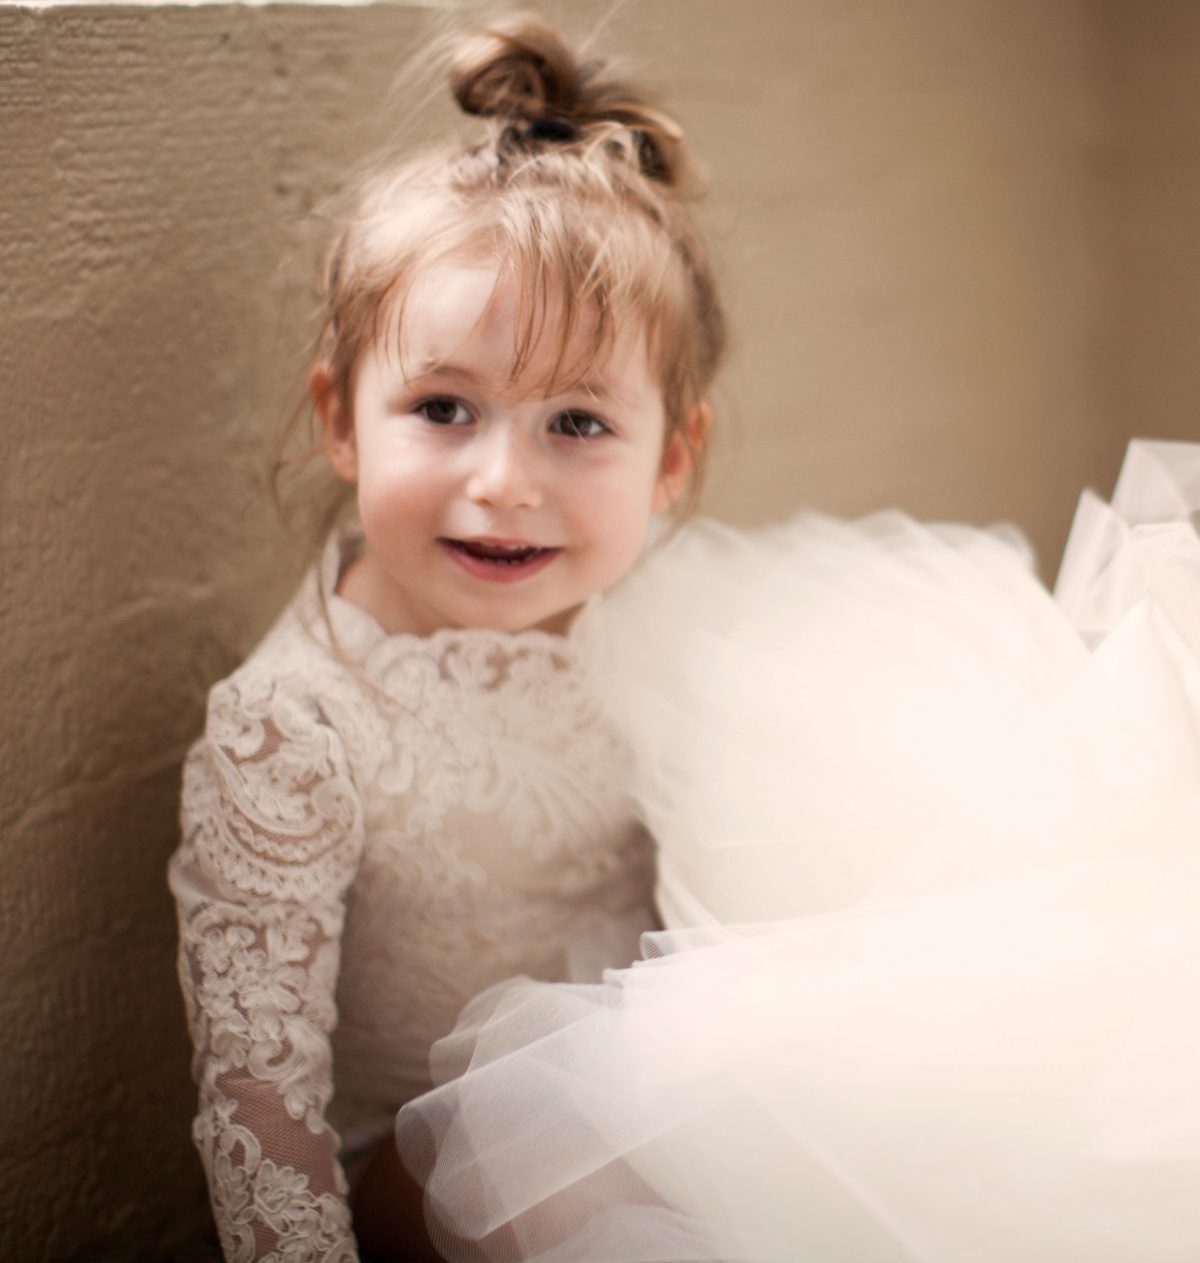 Alencon, gold, ivory, white, lace, leotard, bridal, wedding, flower, girl, dress, blush, cream, onesie, fall, winter, champagne, black, communion, tulle, tutu, floral, crown, anagrassia, south bend, photographer, bodysuit, flower girl, chantilly, flower girl, flower, floral, crown, winter, fall, top, best, handmade, custom, couture, ivanka, gigi, catherine, tea, party, sprinkled cookies, bodysuit, best, friends, tiered, anagrassia